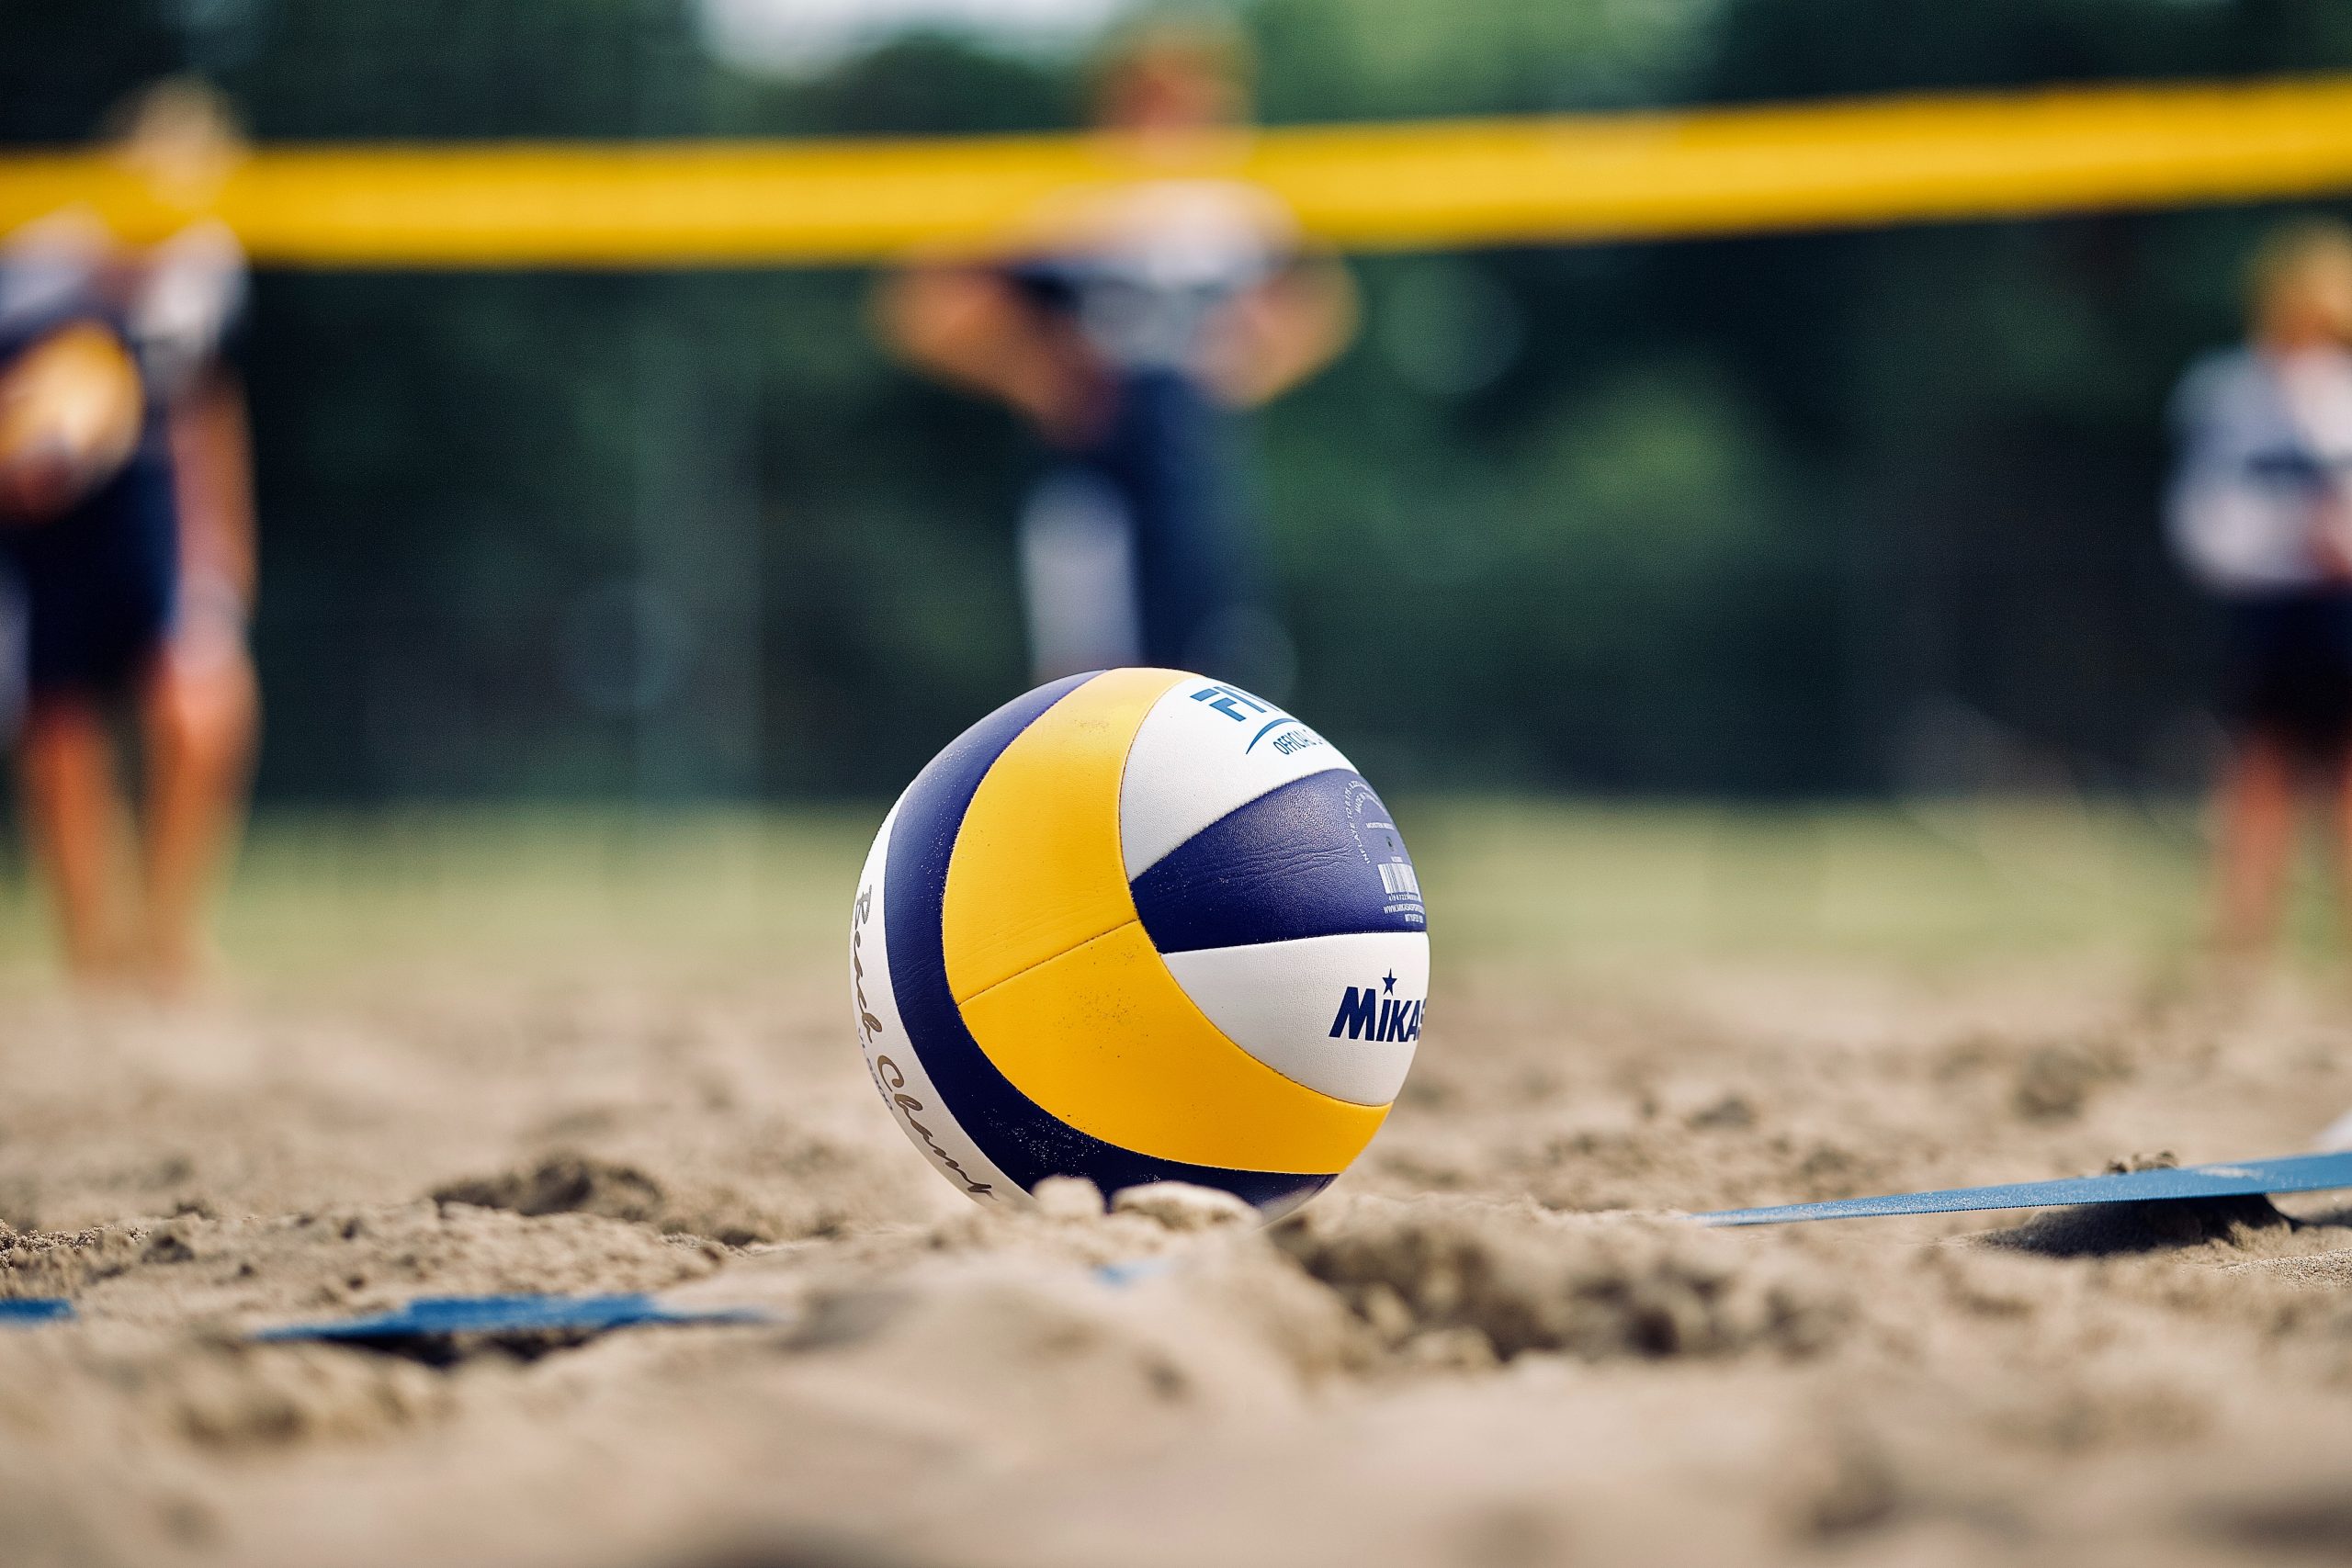 Types Of Volleyball Online Buy, Save 61% | jlcatj.gob.mx